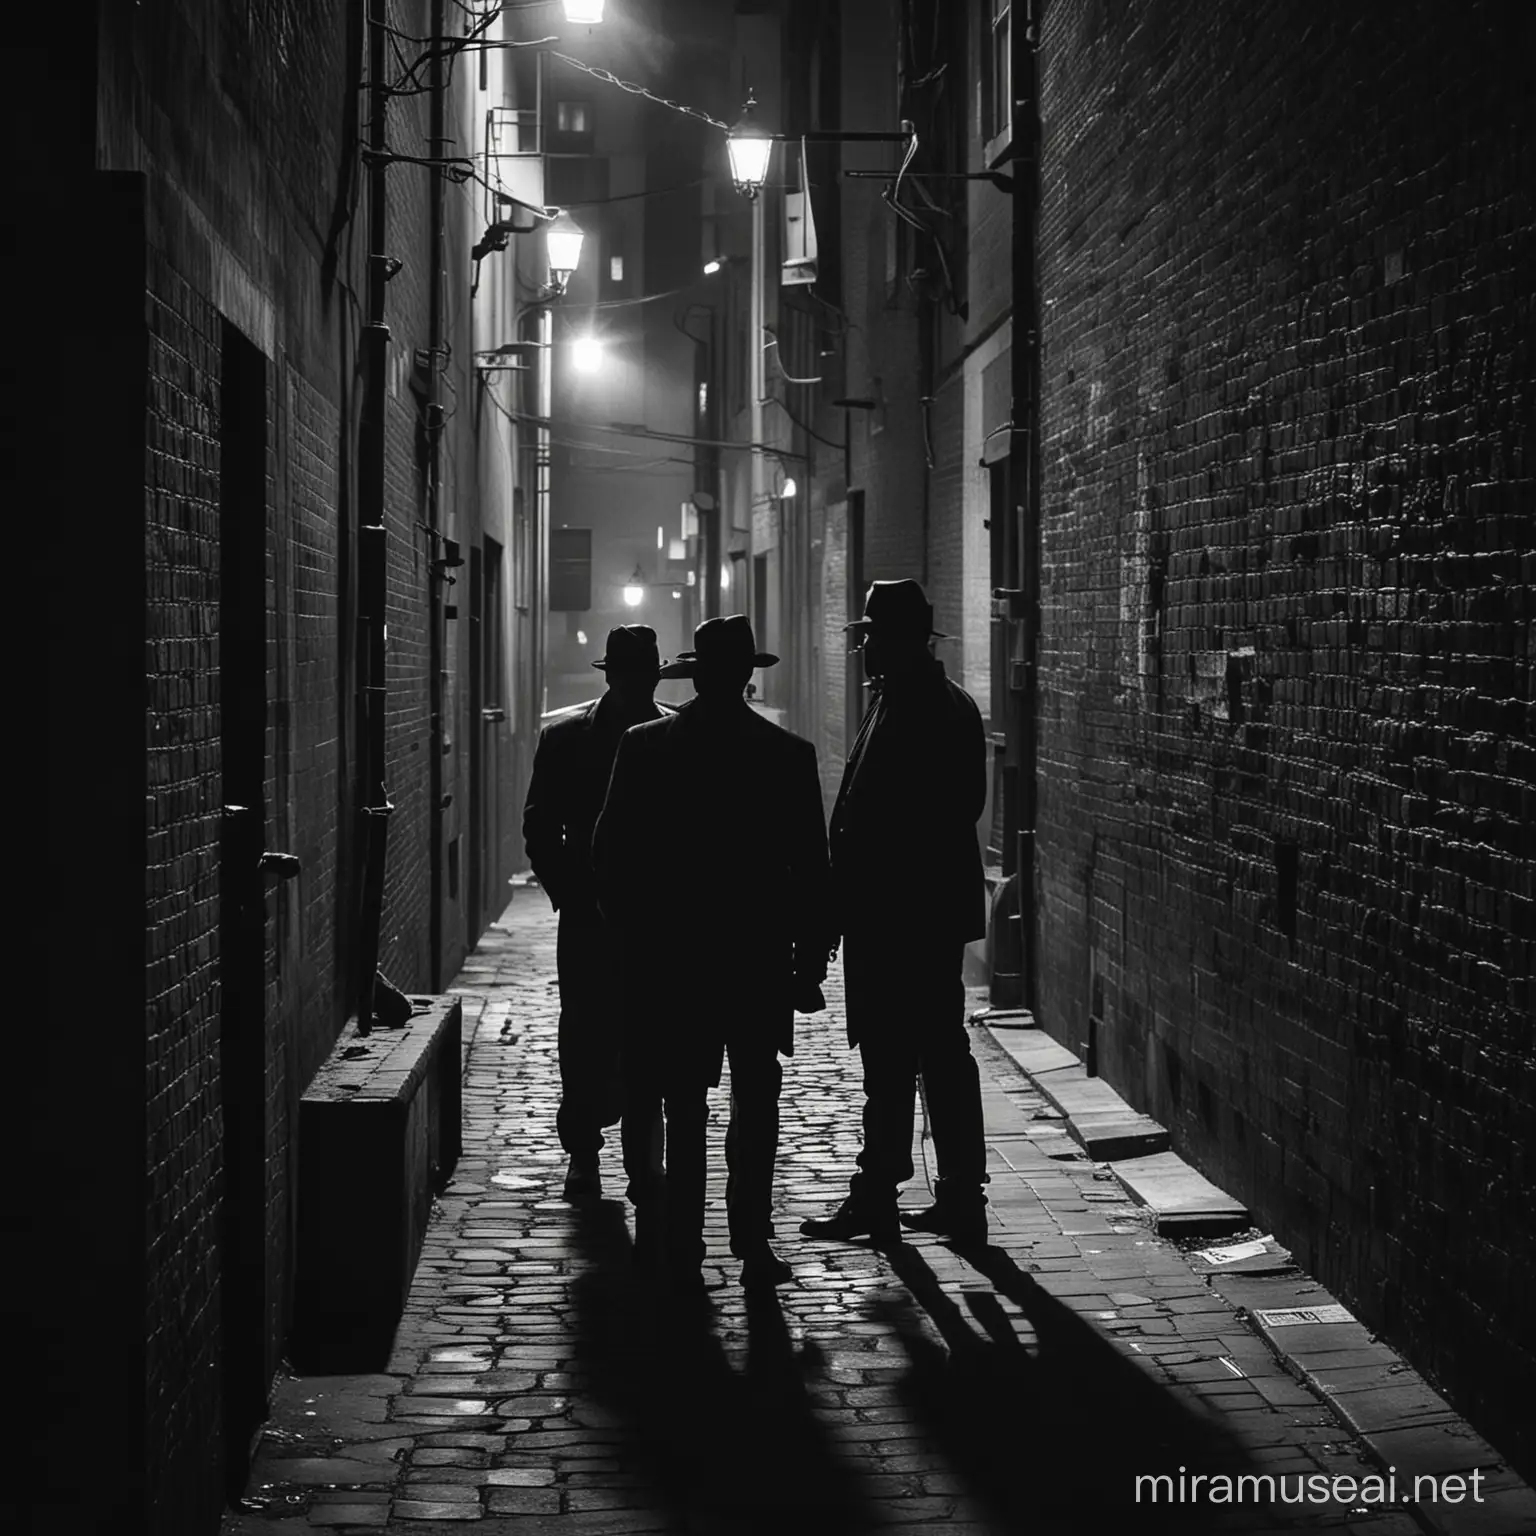 Suspicious Figures Engaged in Conversations in Shadowy Alleyway